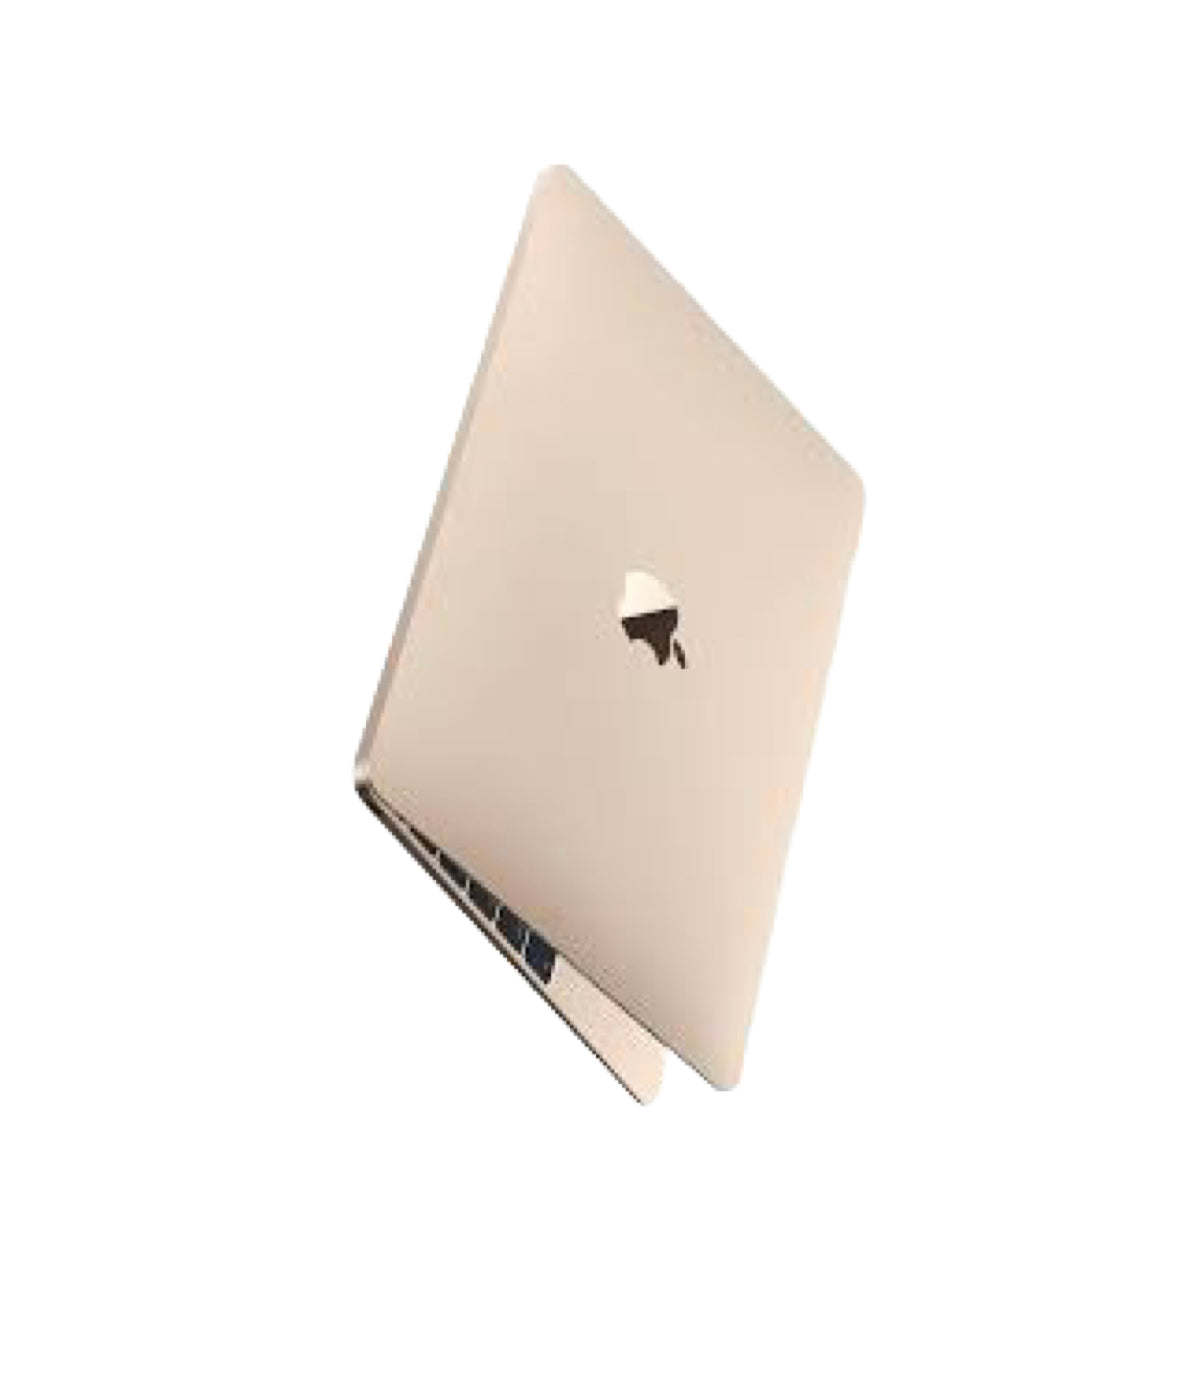 Certified Used Apple MacBook 12 inch 2016 (MLHA2LL/A) Intel Core